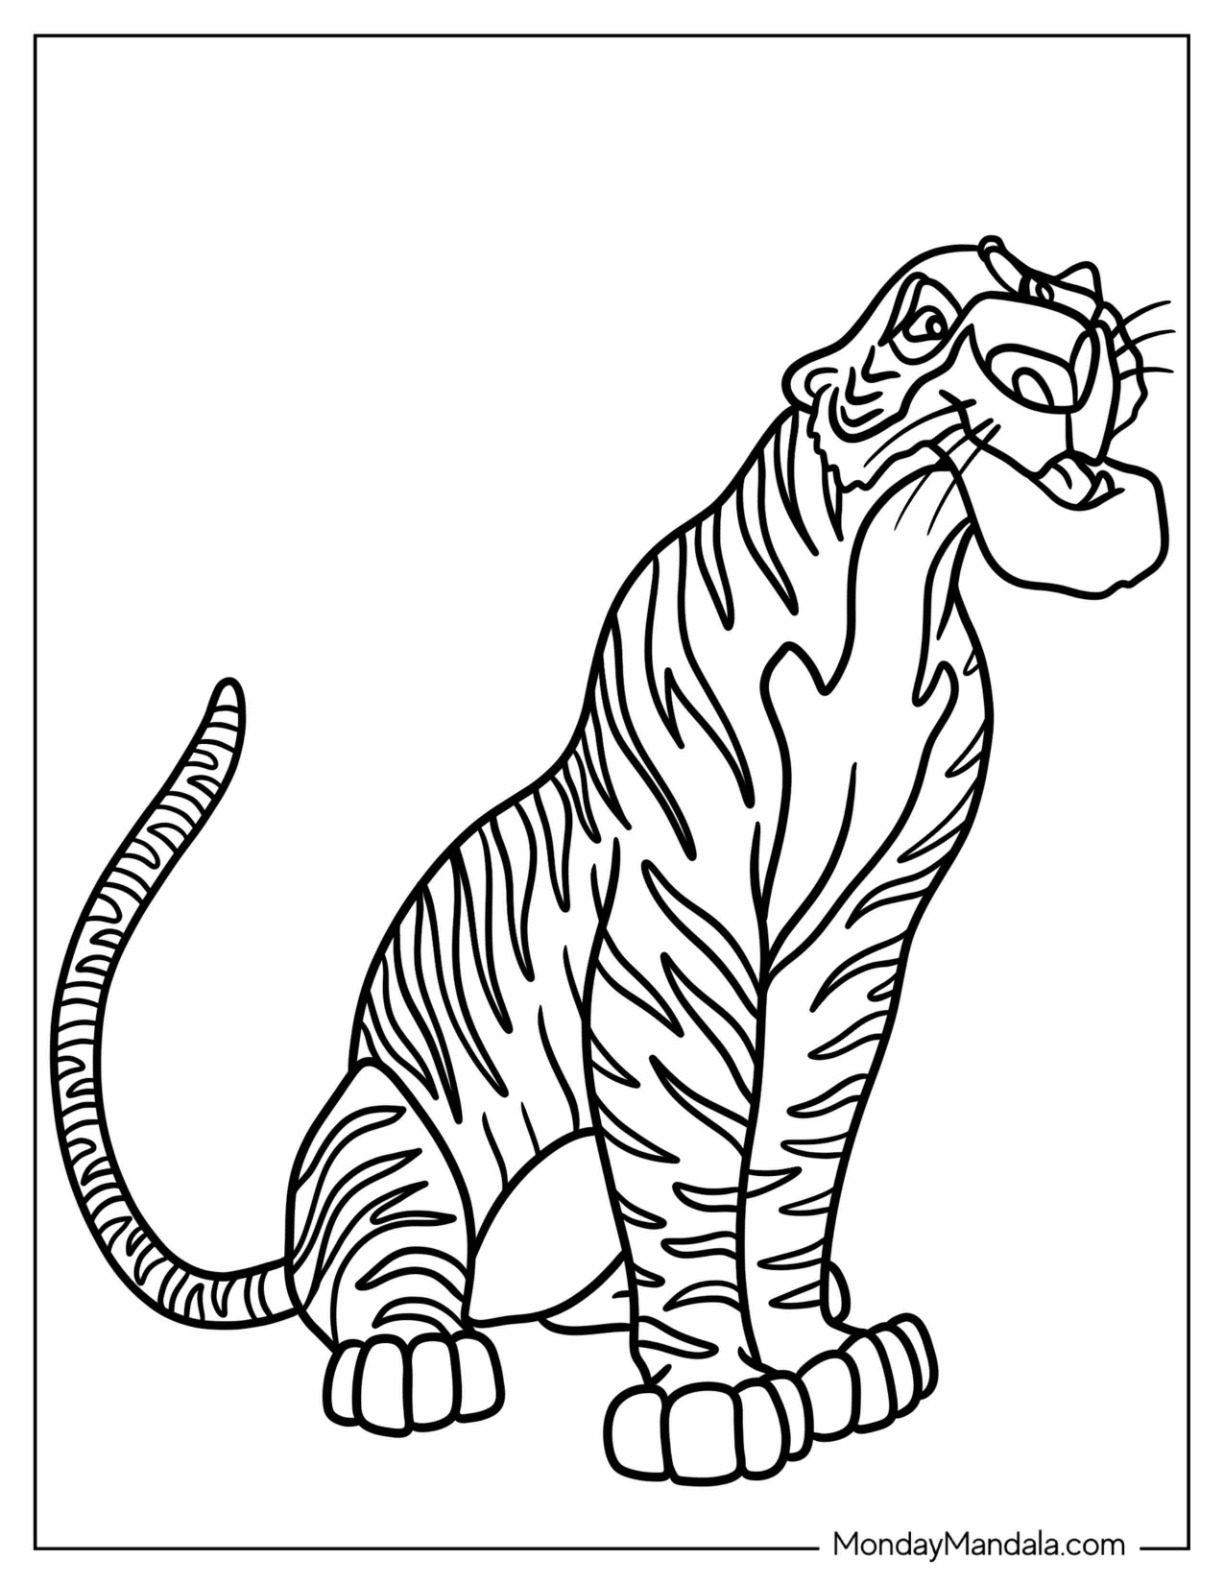 Jungle book coloring pages free pdf printable